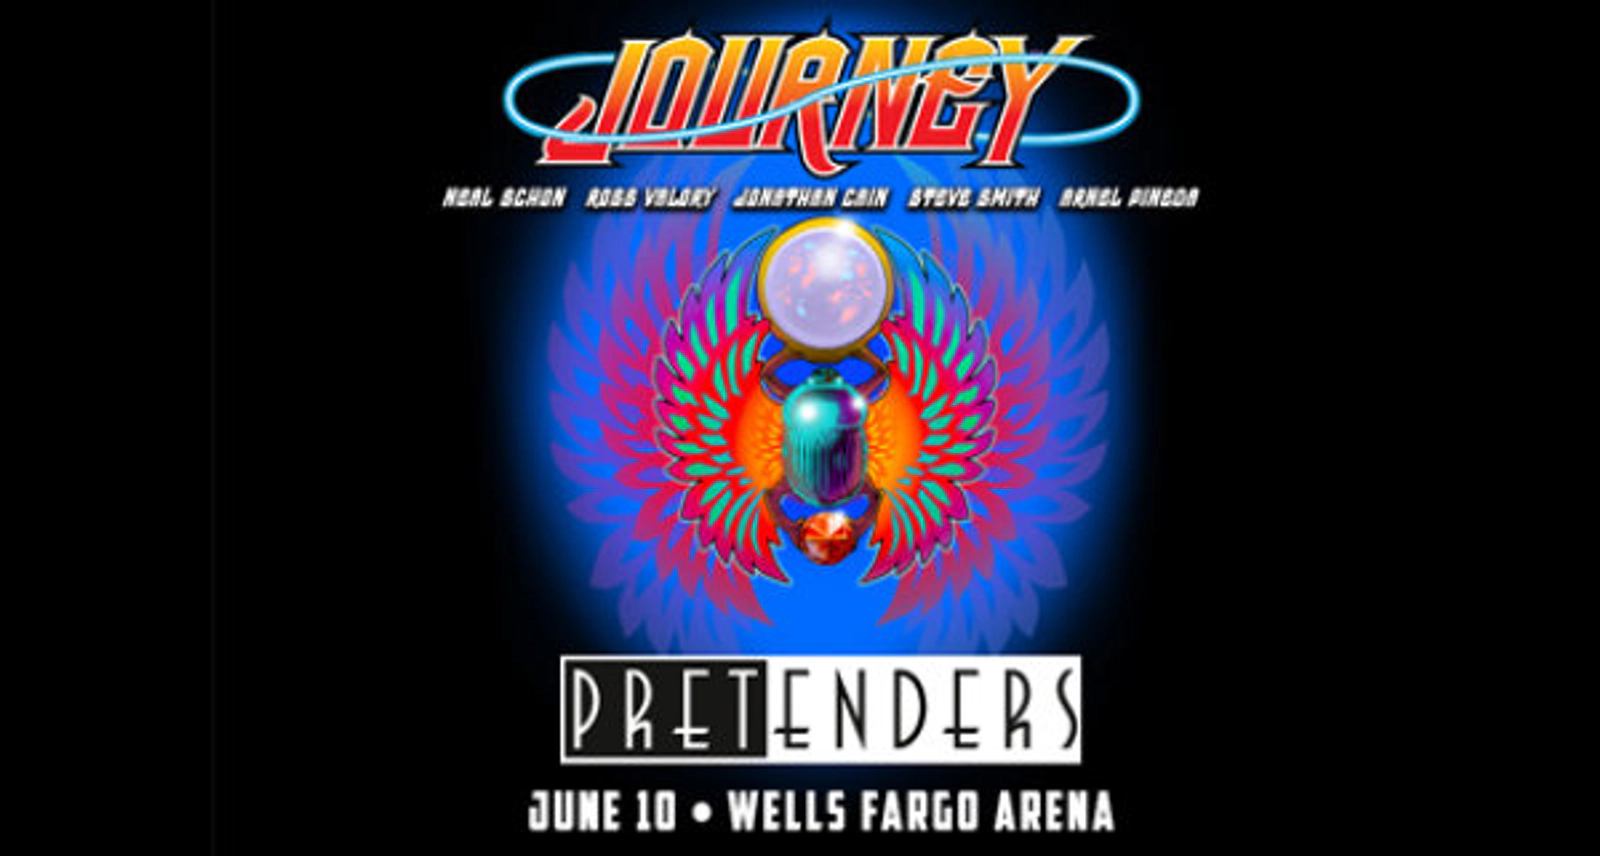 Win Tickets to Journey with the Pretenders! - Thumbnail Image